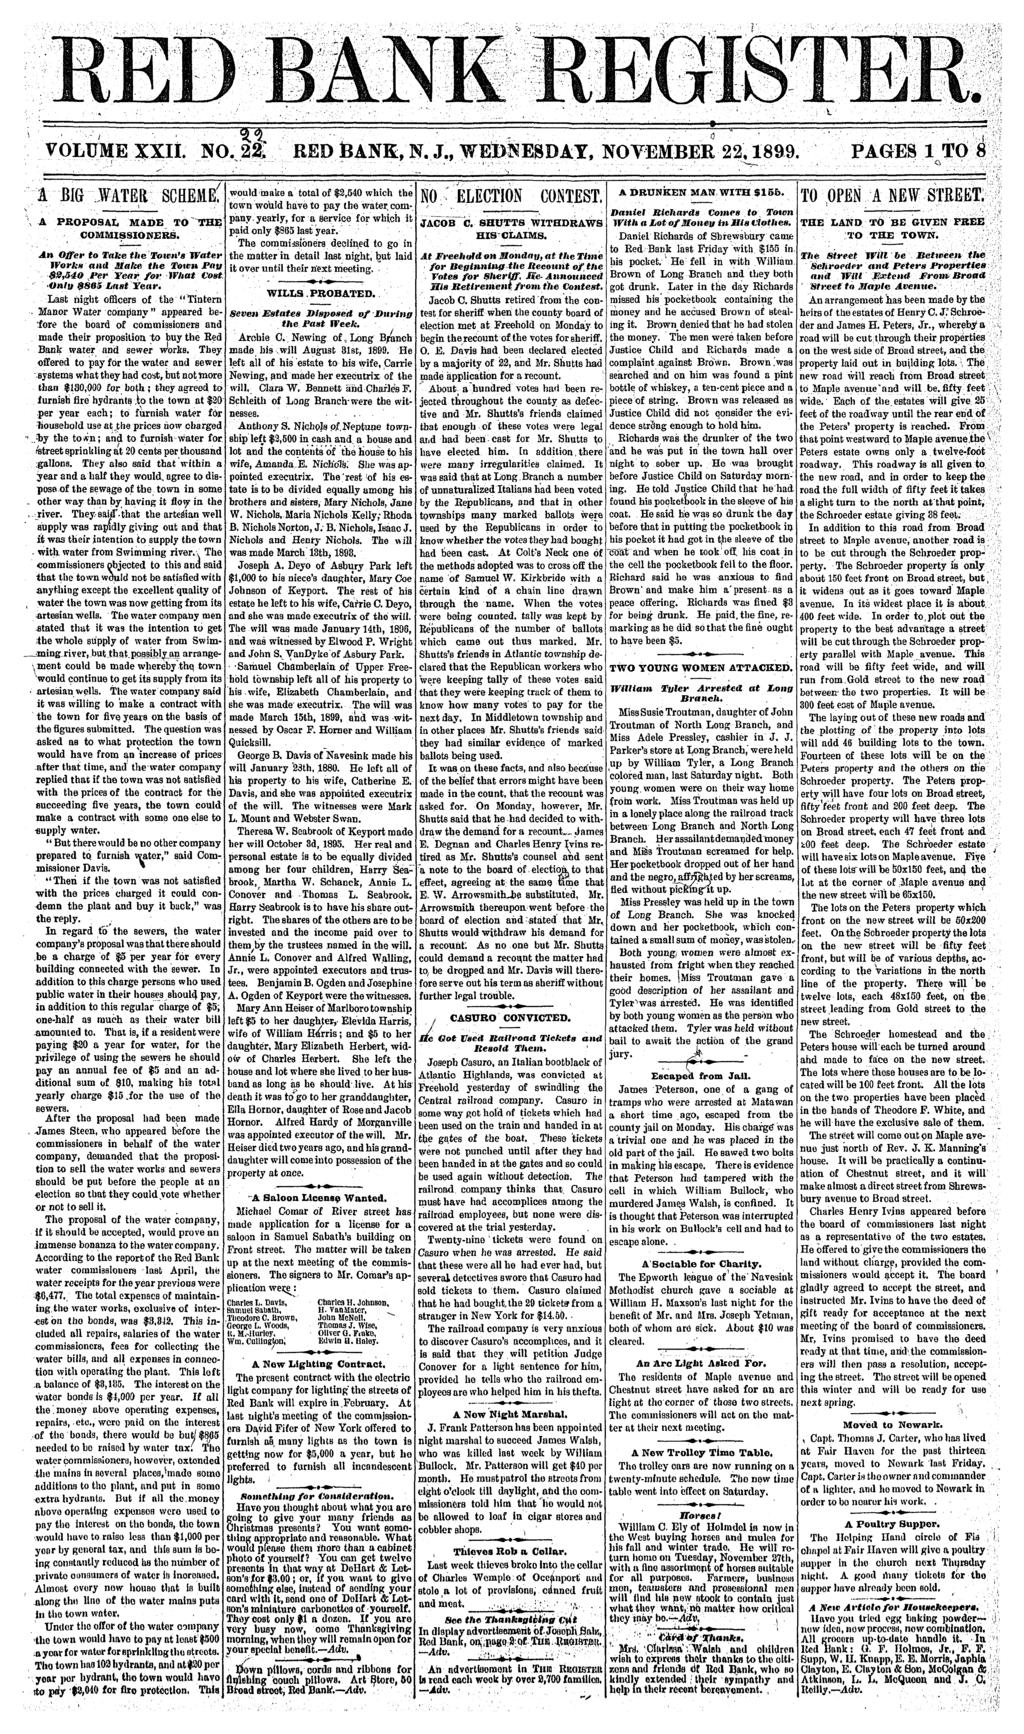 . VNE. _ - : VOLUME XX. NO. 22. RED BANK, N.J., WEDNESDAY, NOVEMBER 22,1899. PAGES 1 TO 8 1 BG MTEft SCHEME. A PROPOSAL MADE TO THE COMMSSONERS.